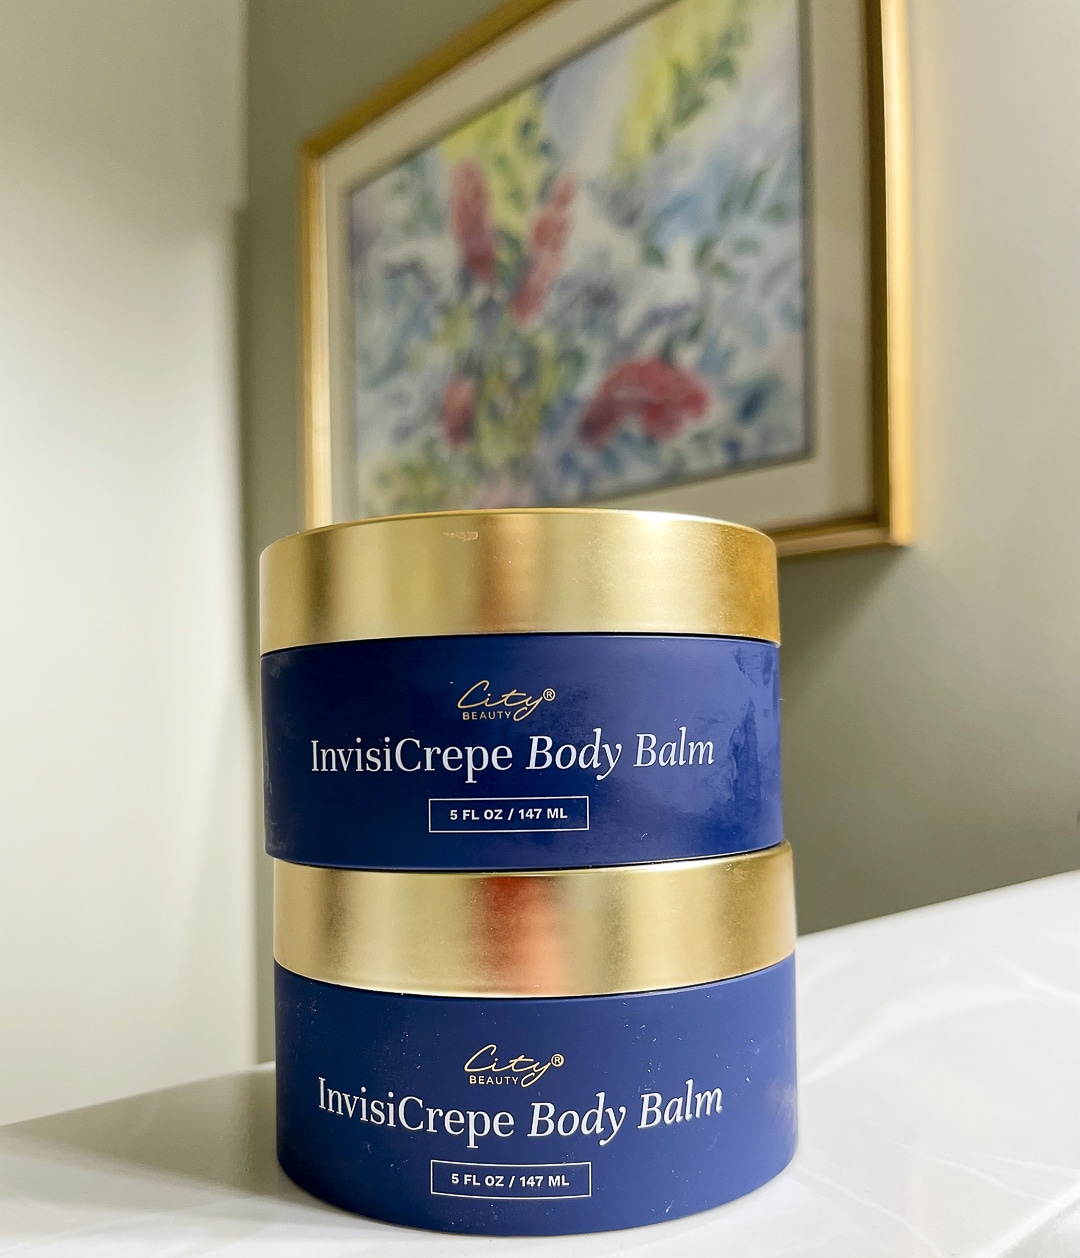 Over 40 Fashion Blogger, Tania Stephens is wearing a blue top and trying City Beauty's Inviscrepe Body Balm20